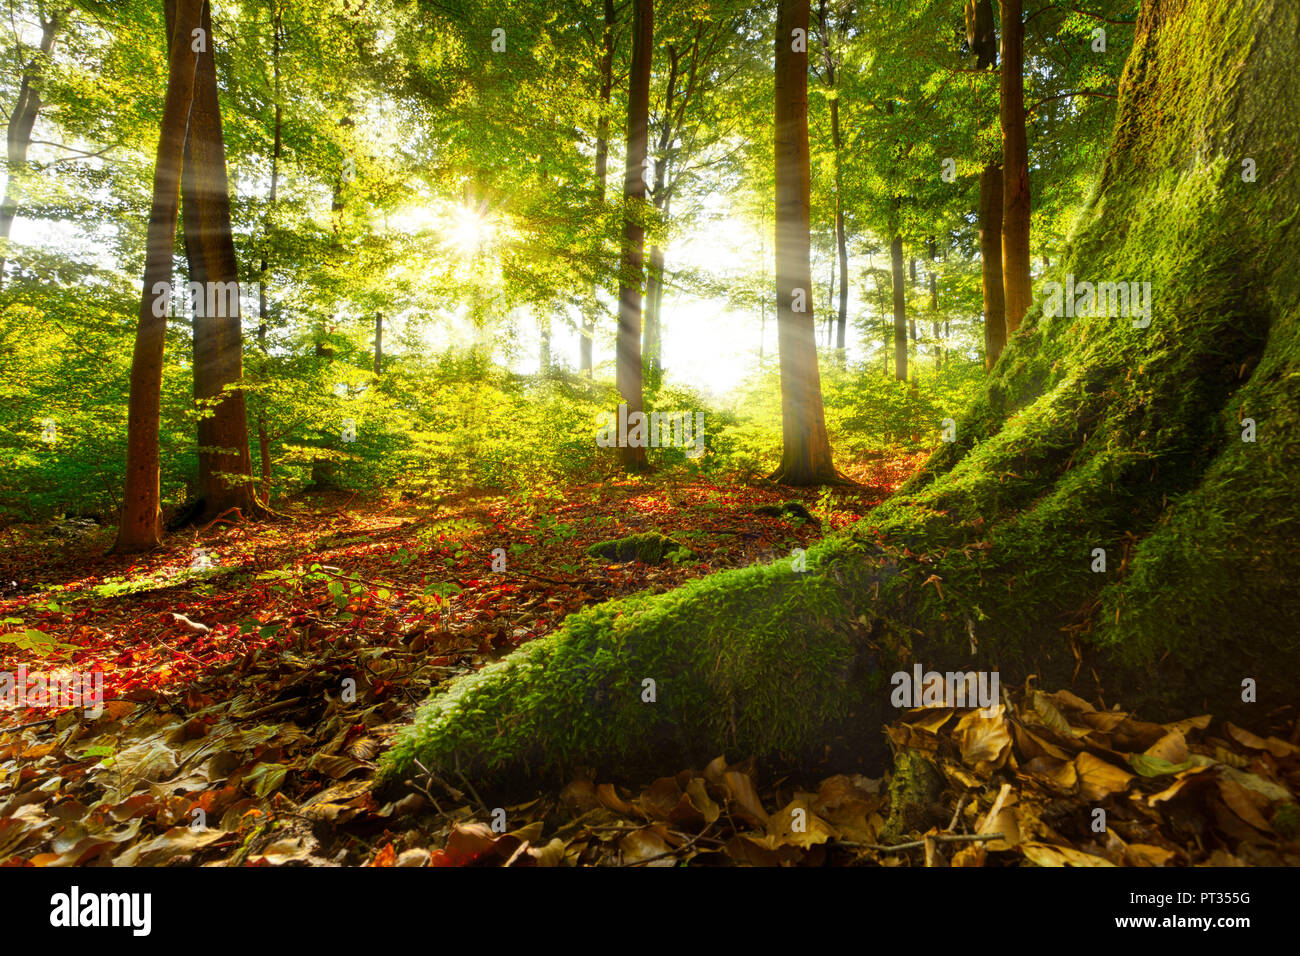 sunrays shining into a beech forest, mossy root in foreground leads into image, location:warstein, sauerland, germany Stock Photo